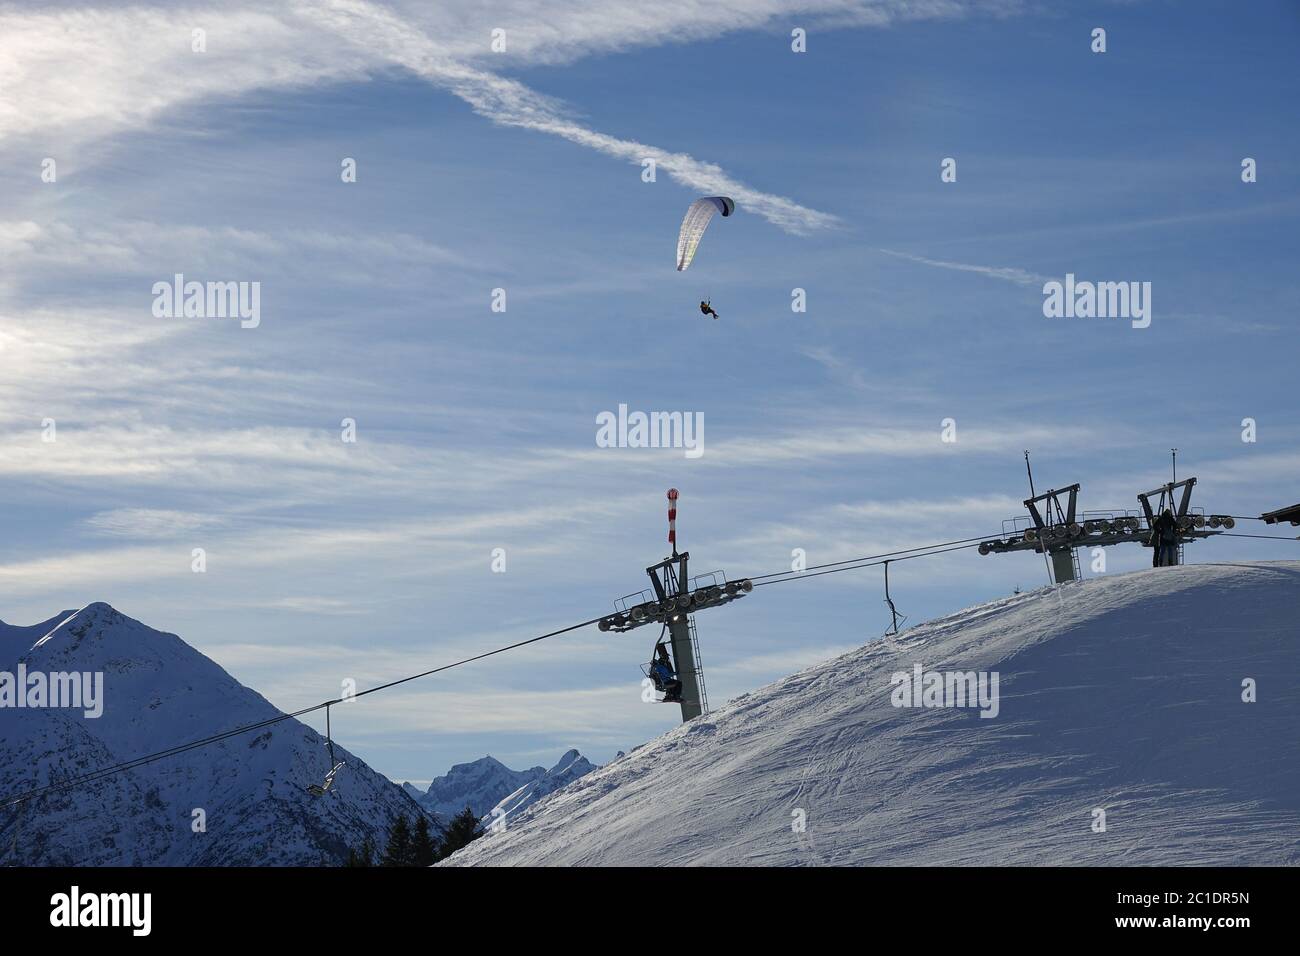 Paragliders and skiers at the chairlift in the snow-covered mountains of the Lech Valley in Austria / Tyrol. Stock Photo